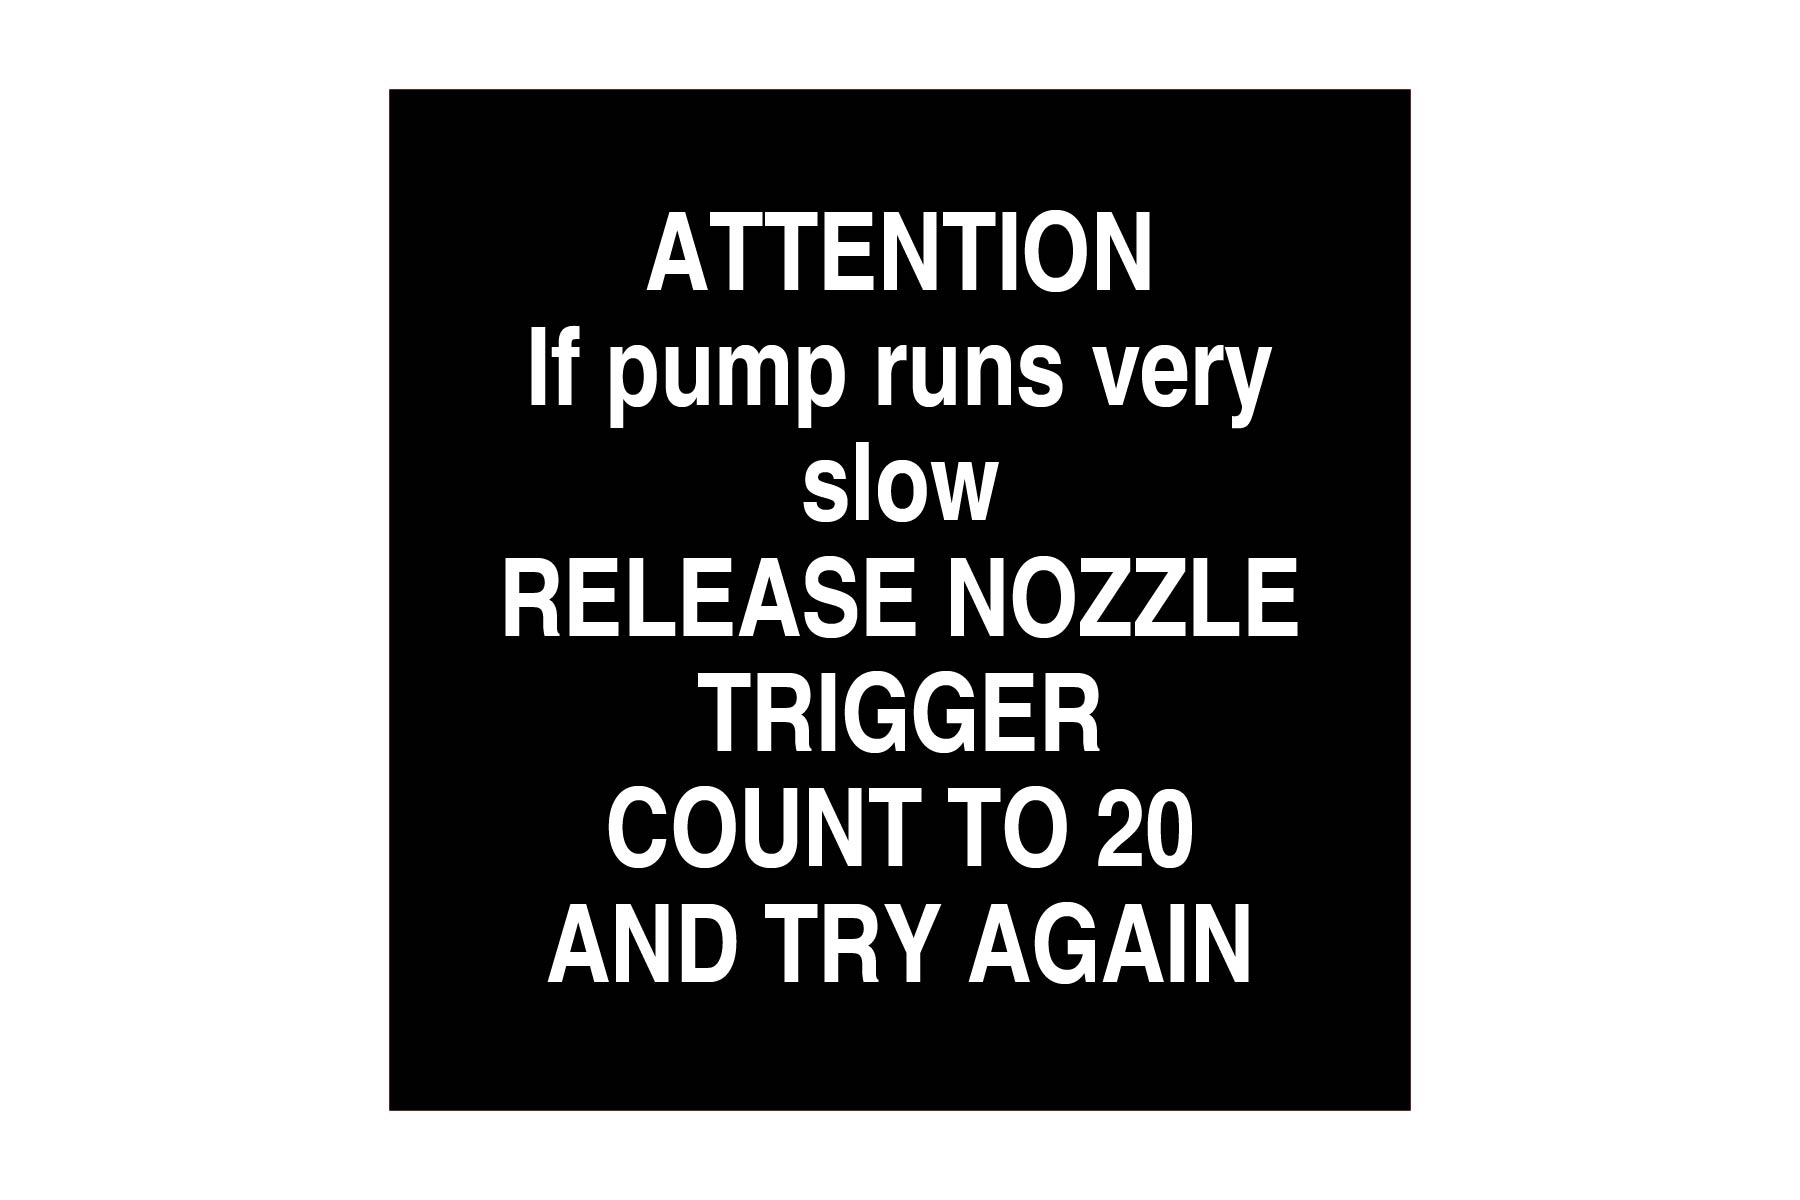 Gas-Station-Attention-If-Pump-Runs-Very-Slow-6x6-White-on-Black-01.jpg